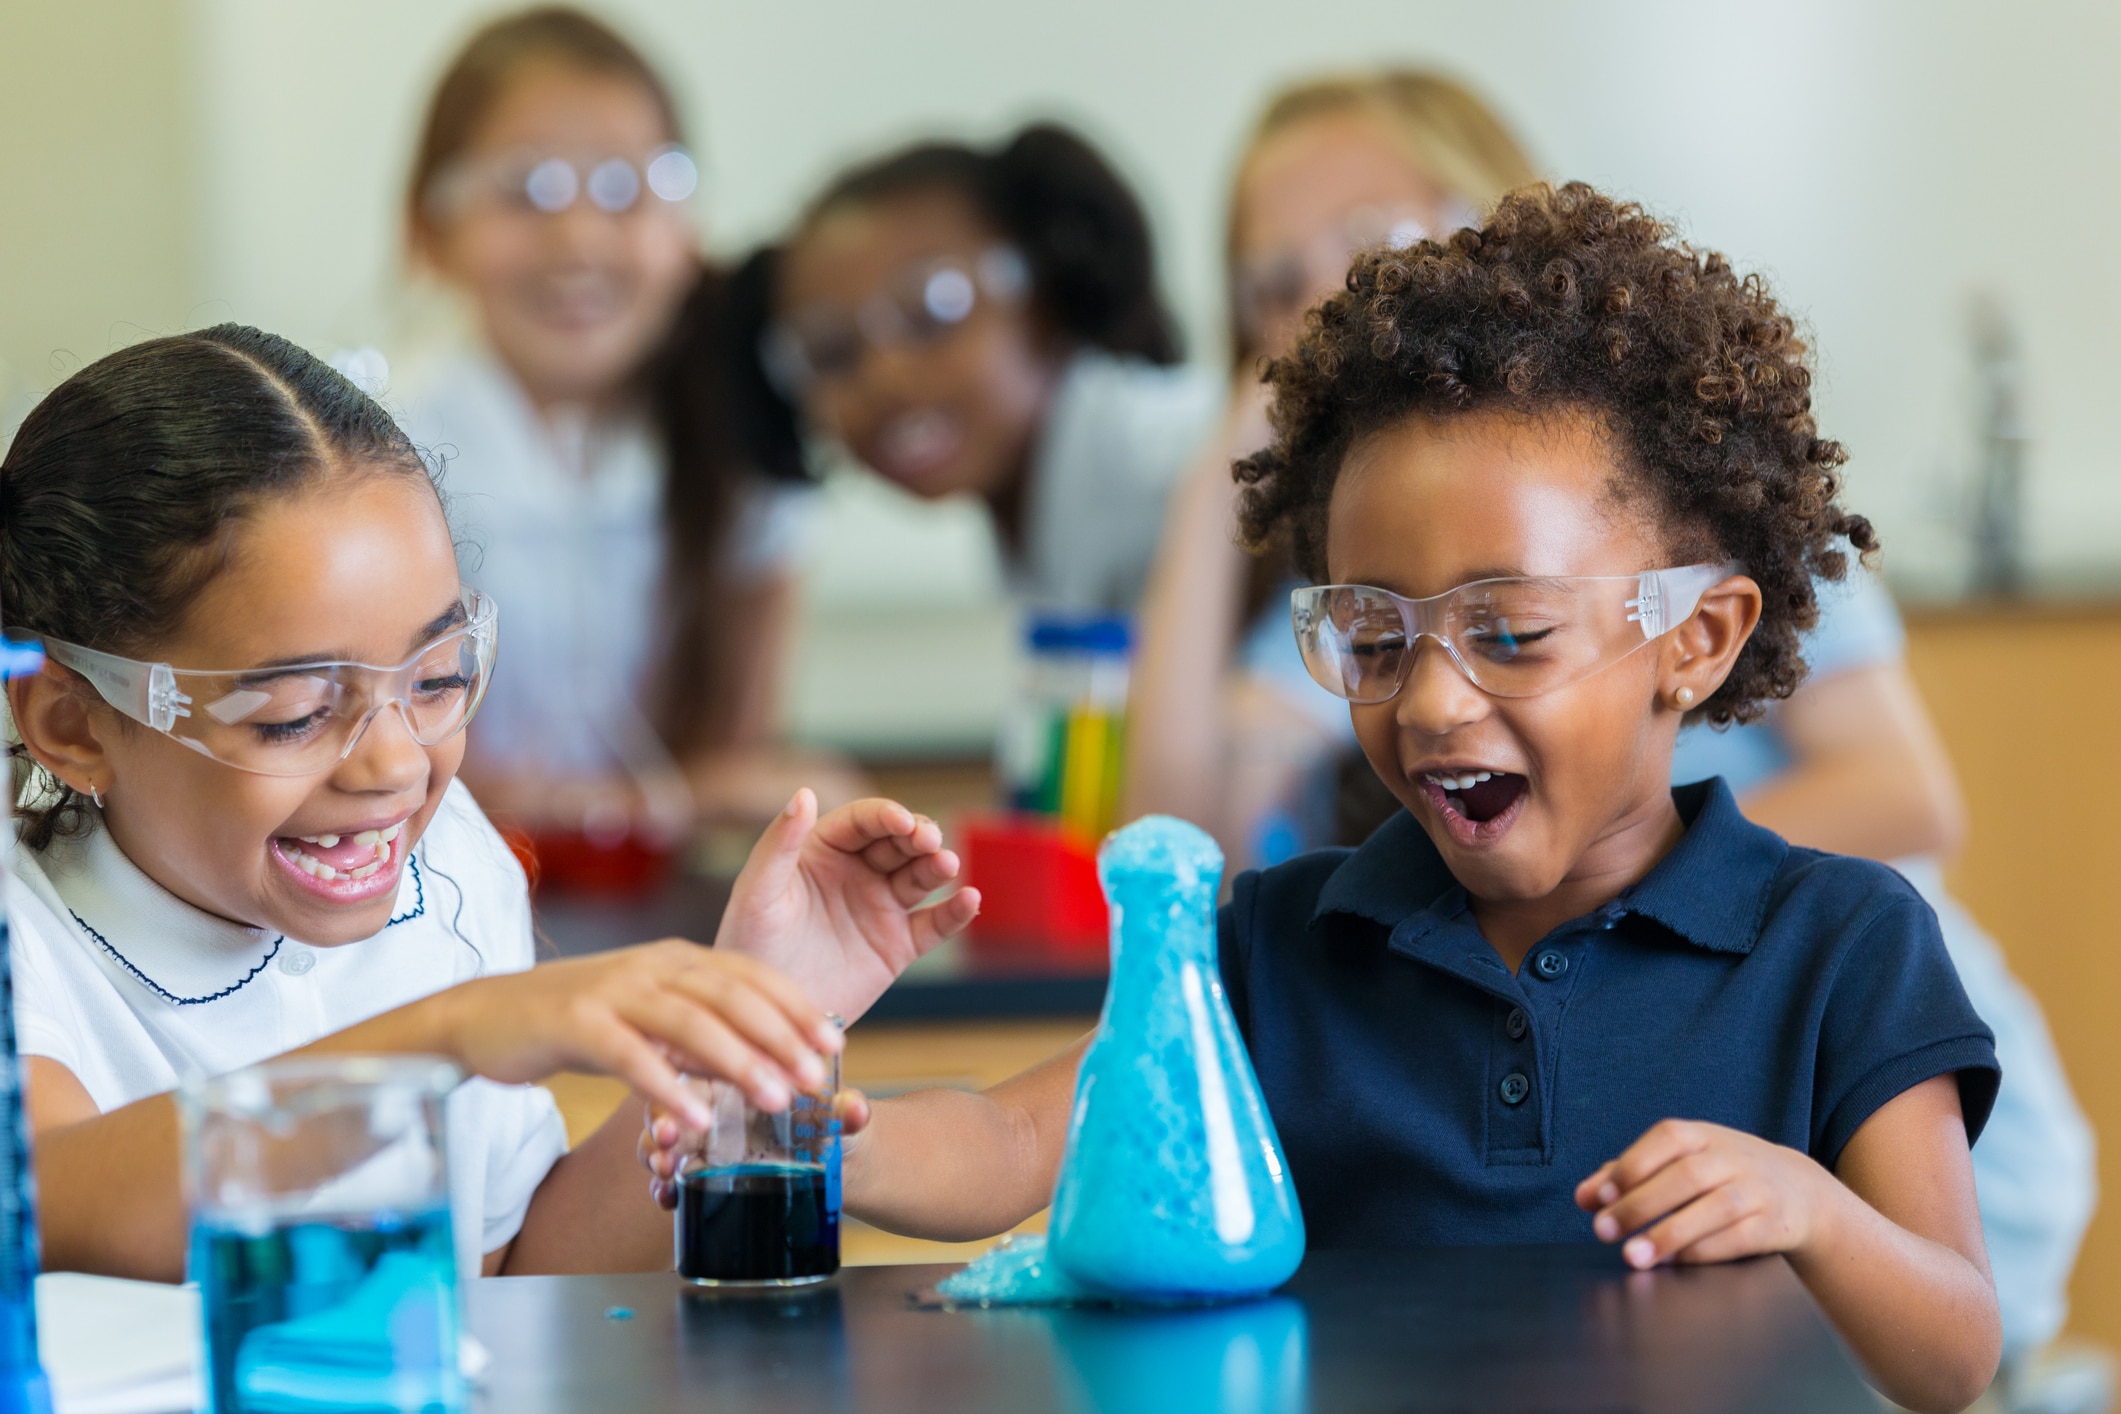 Excited-school-girls-during-chemistry-experiment-639407632_2125x1416